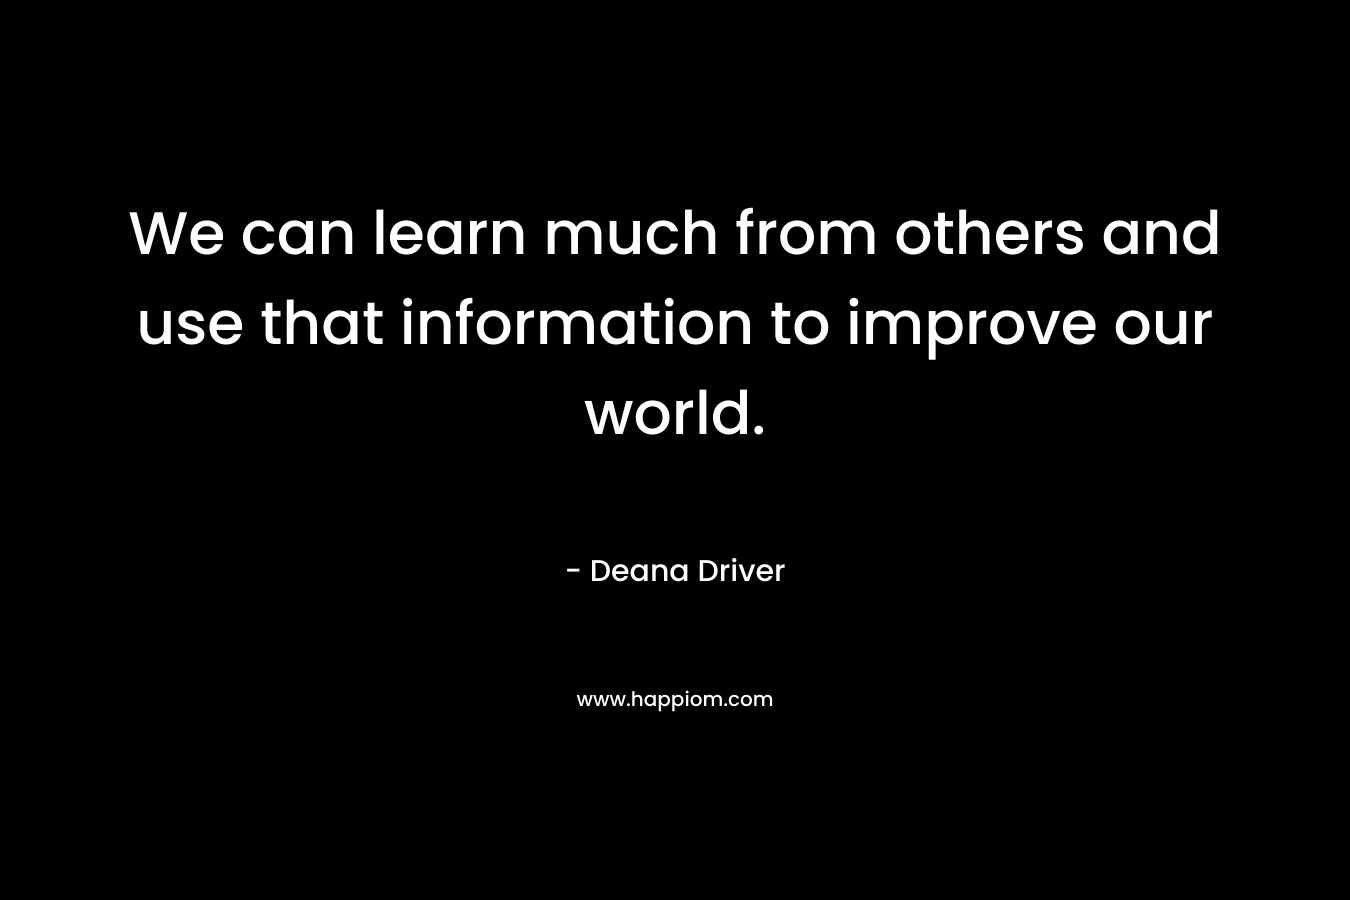 We can learn much from others and use that information to improve our world.